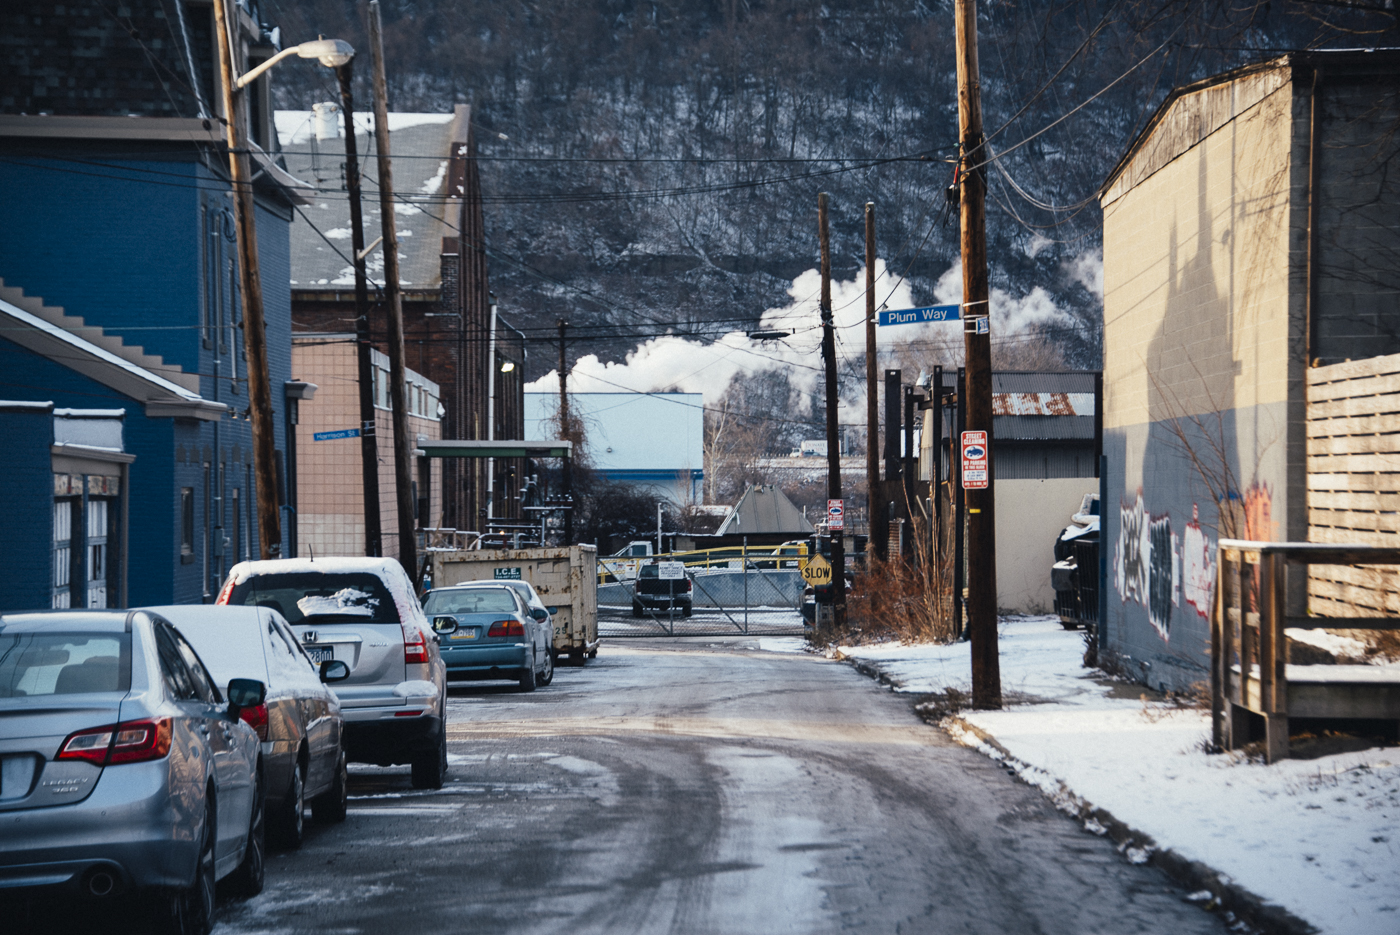 Lawrenceville Pittsburgh Winter